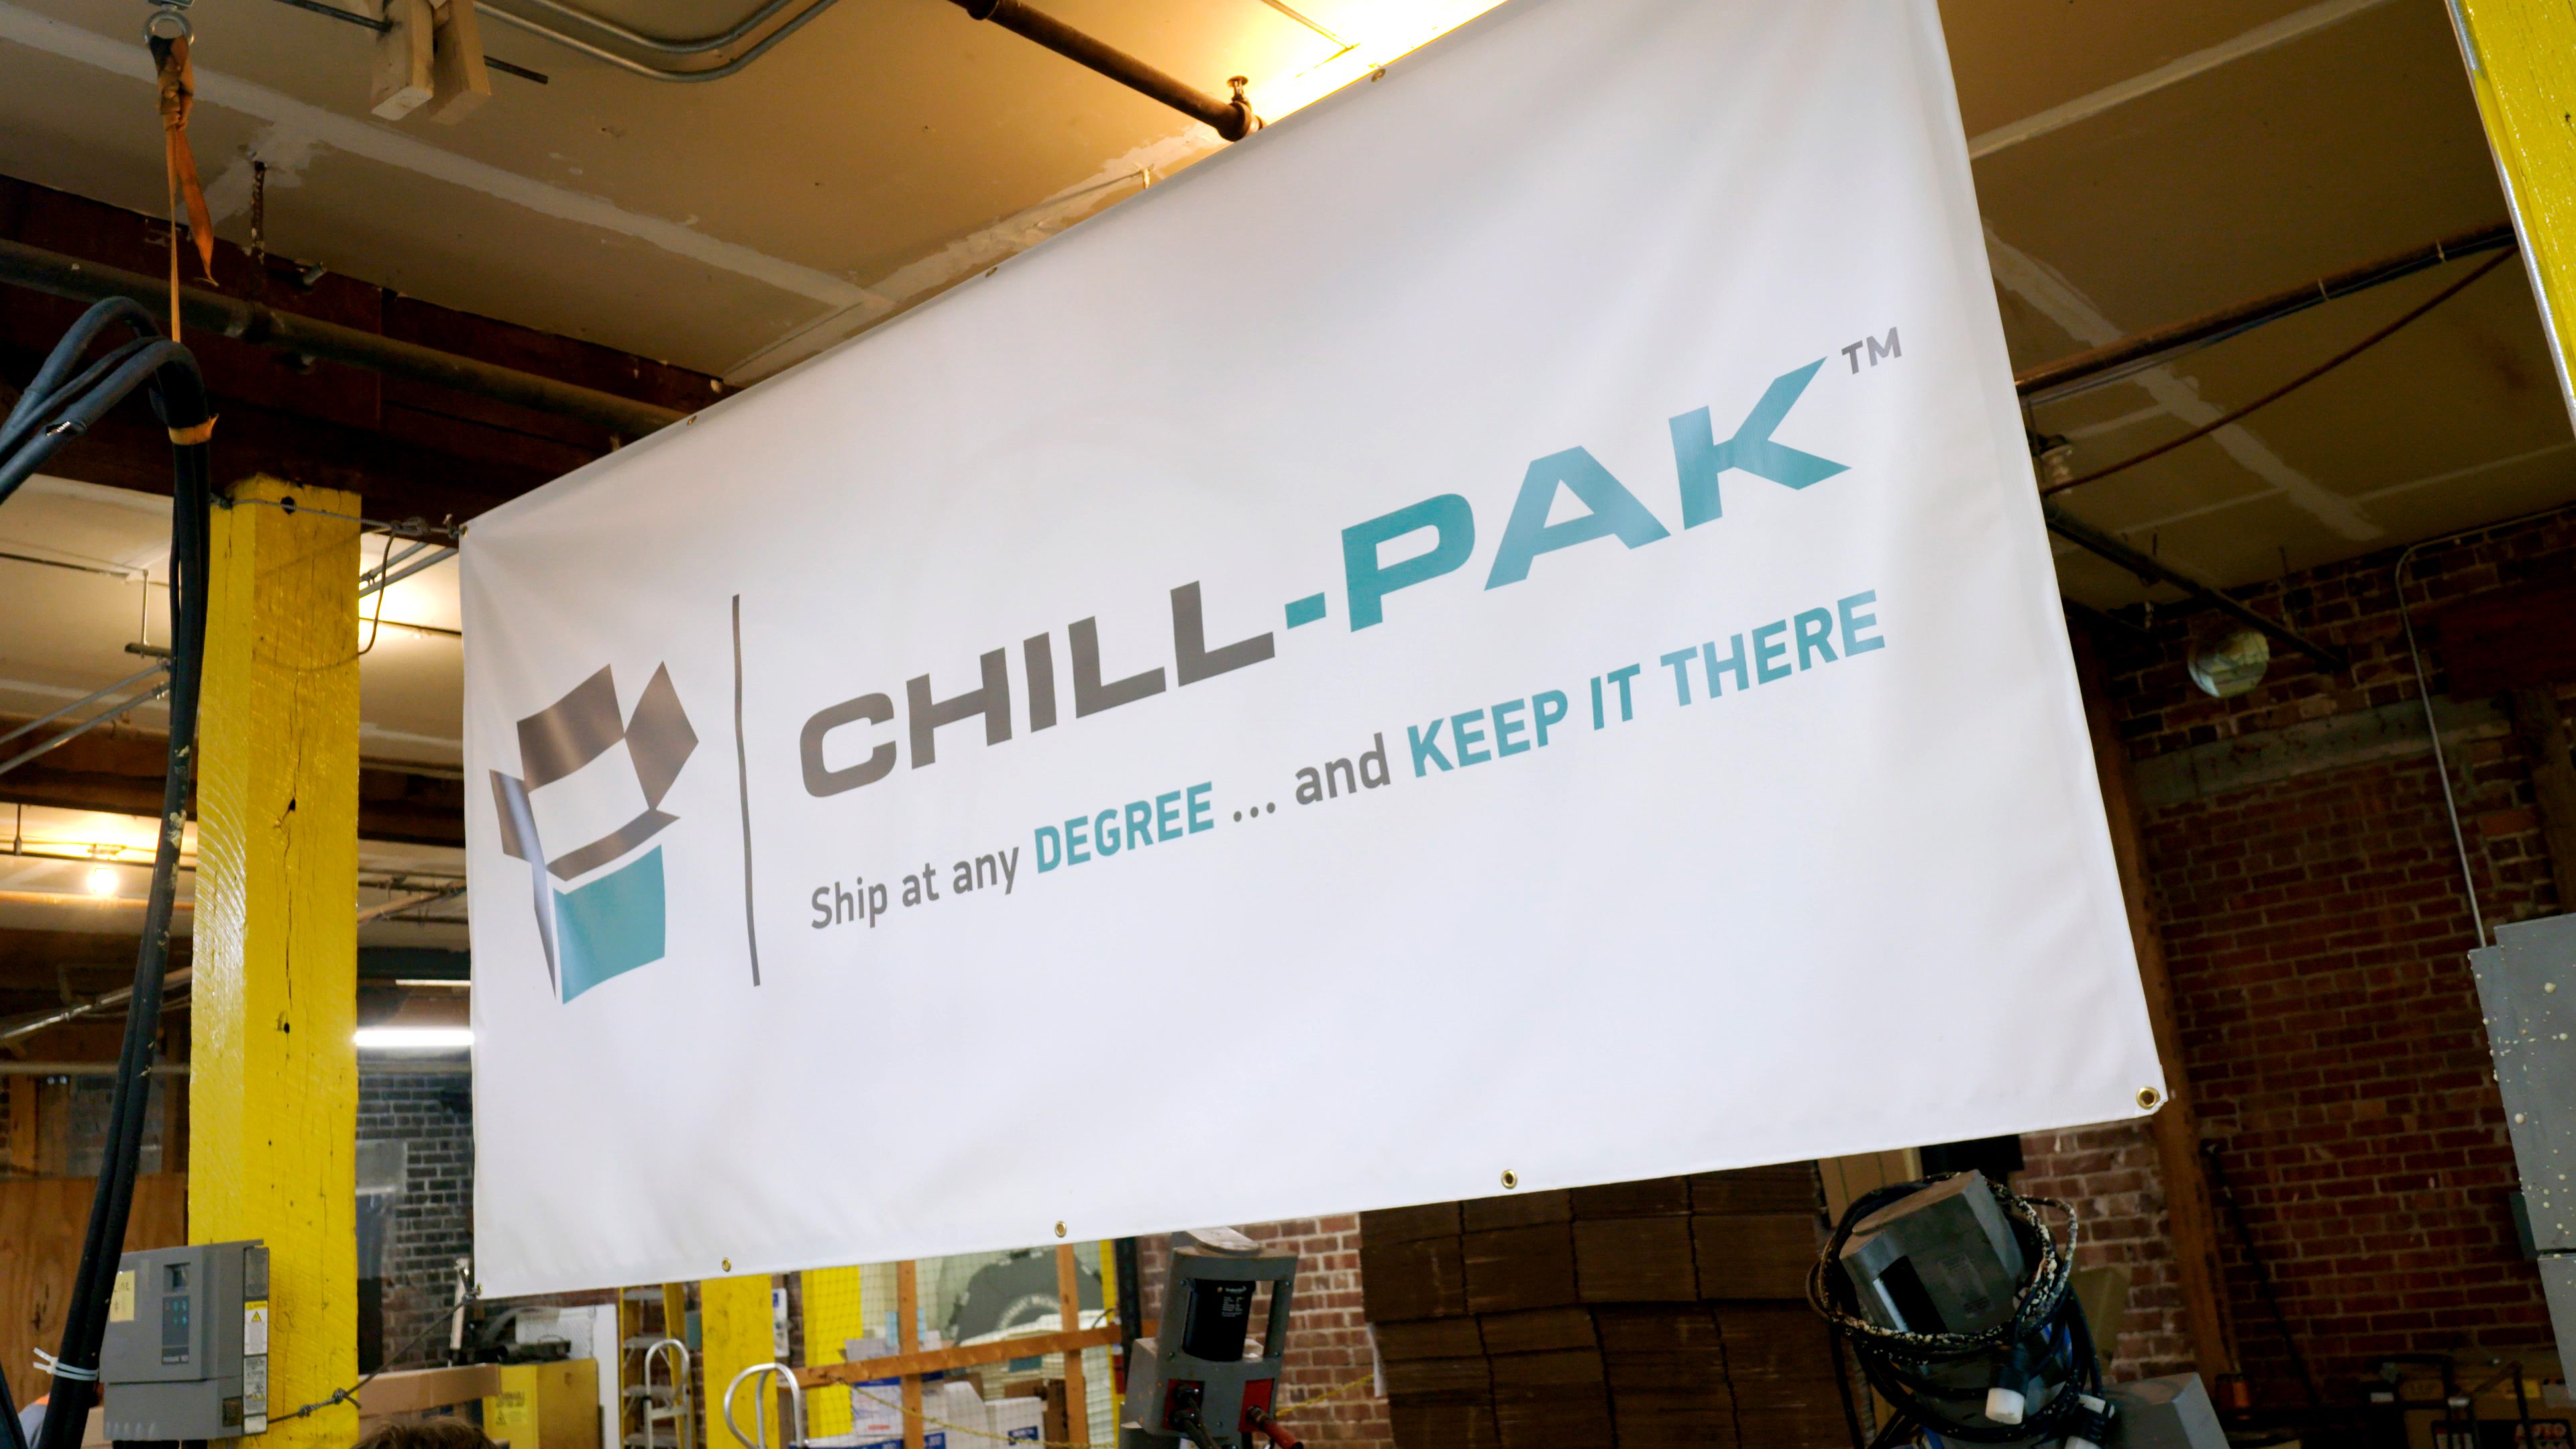 Chill-Pak banner inside warehouse constructing covid-19 shippers